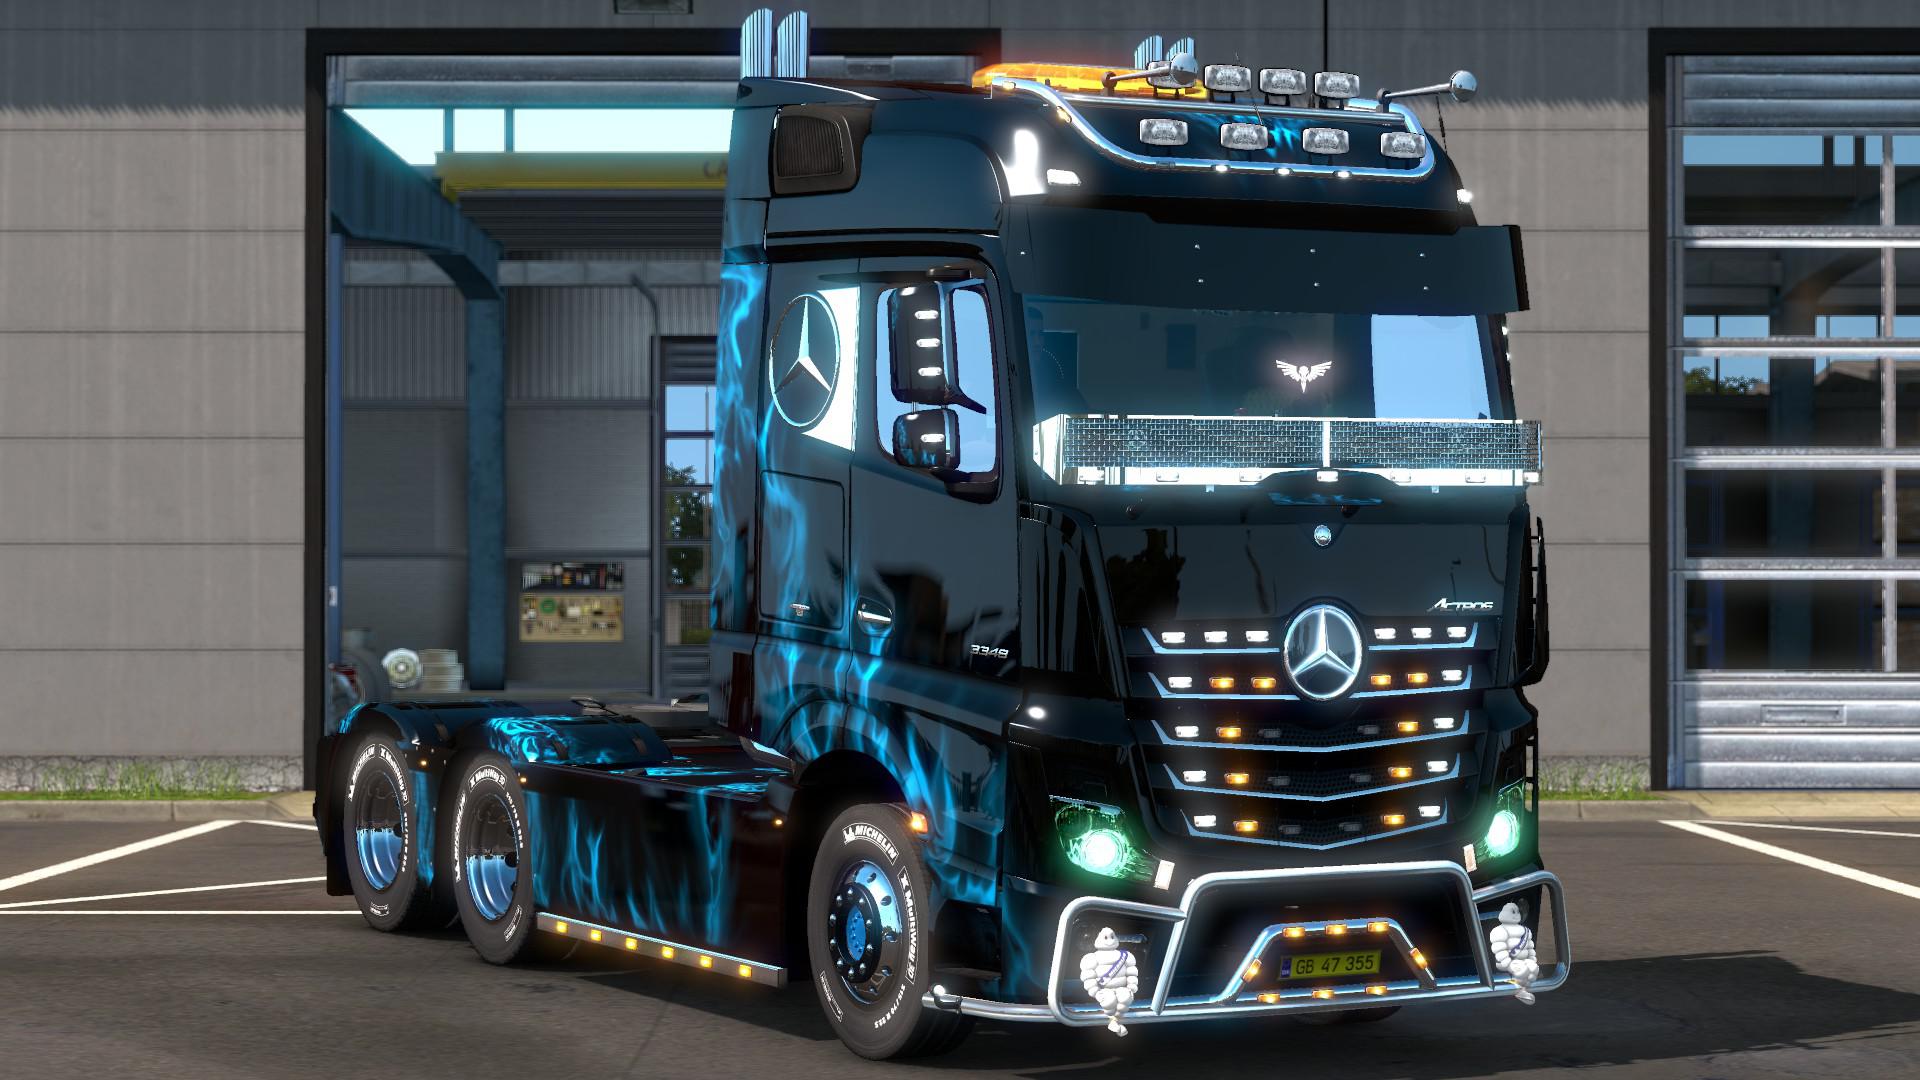 Tool ets 2. Мерседес Бенц Актрос етс 2. Mercedes Actros 2014. Mercedes Actros 2. Грузовик Мерседес Бенц Актрос етс 2.